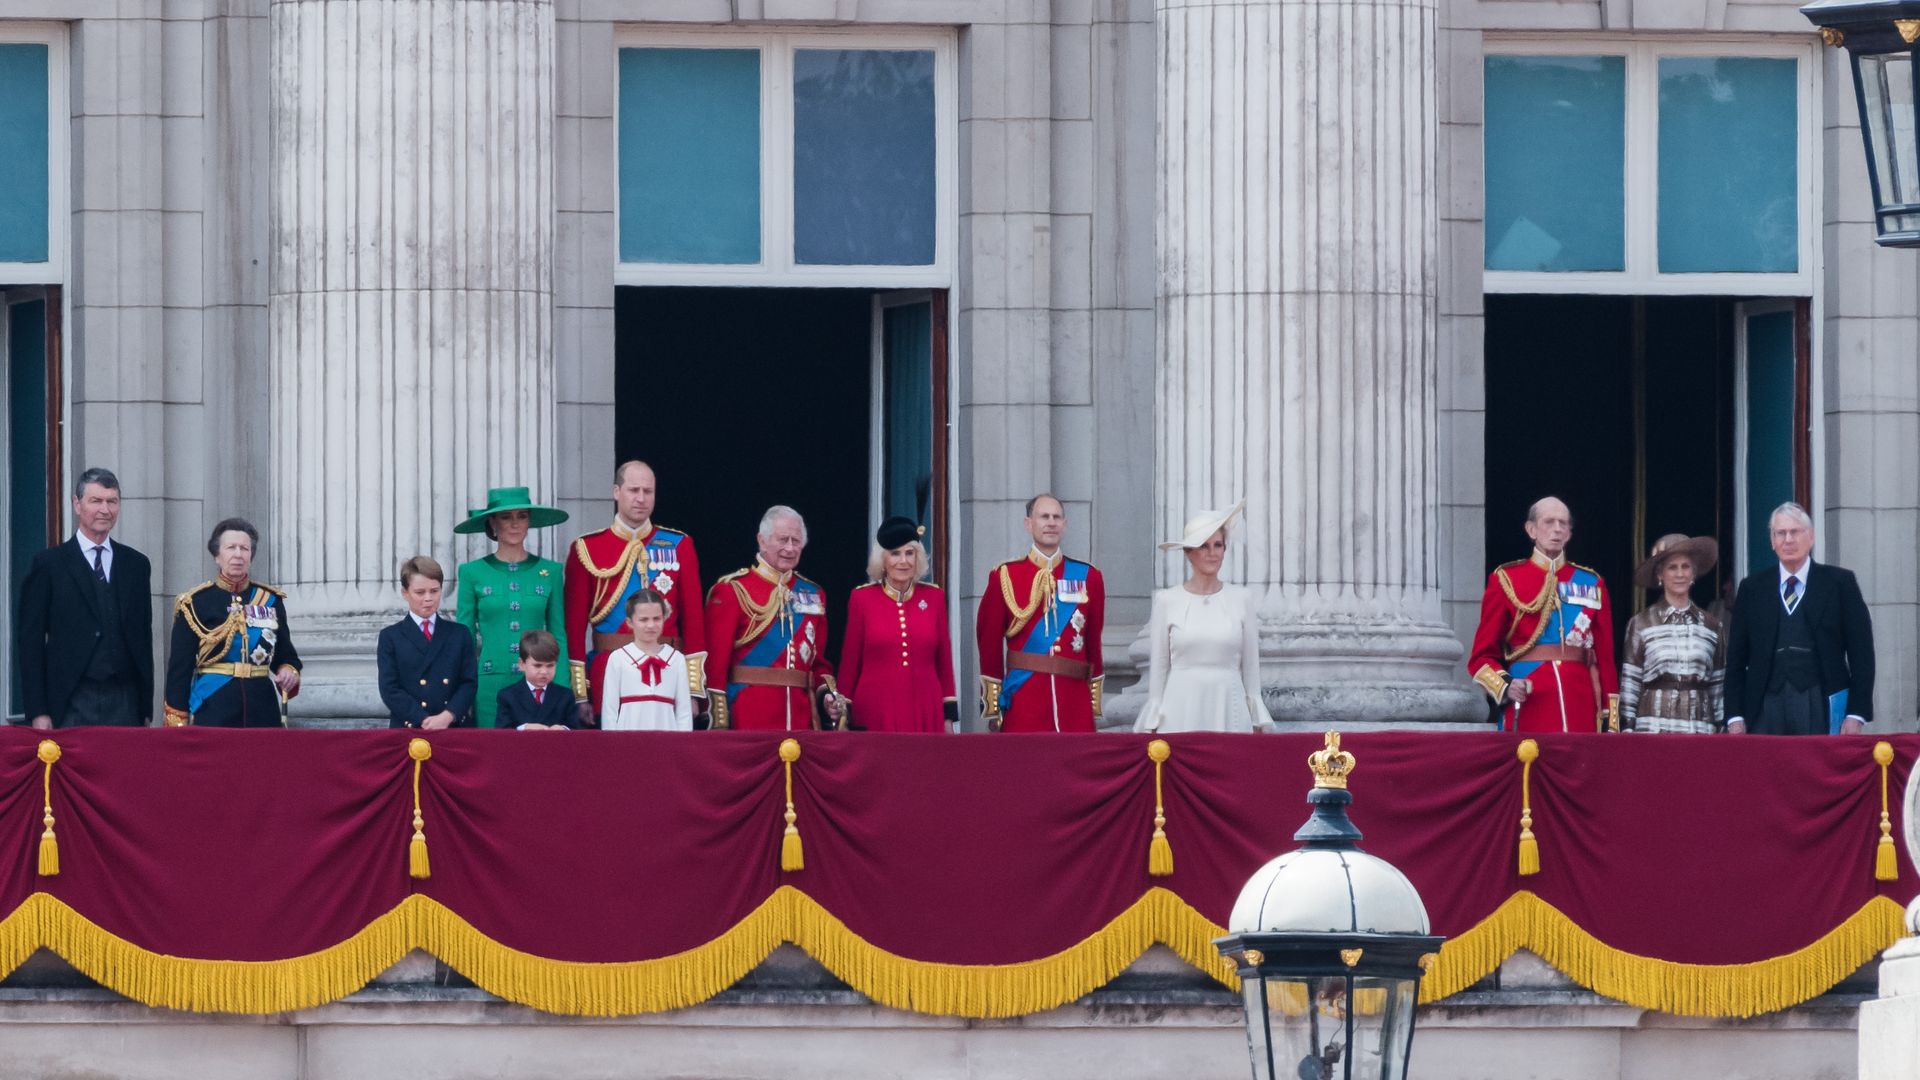 Only working royals accompanied the monarch on the balcony